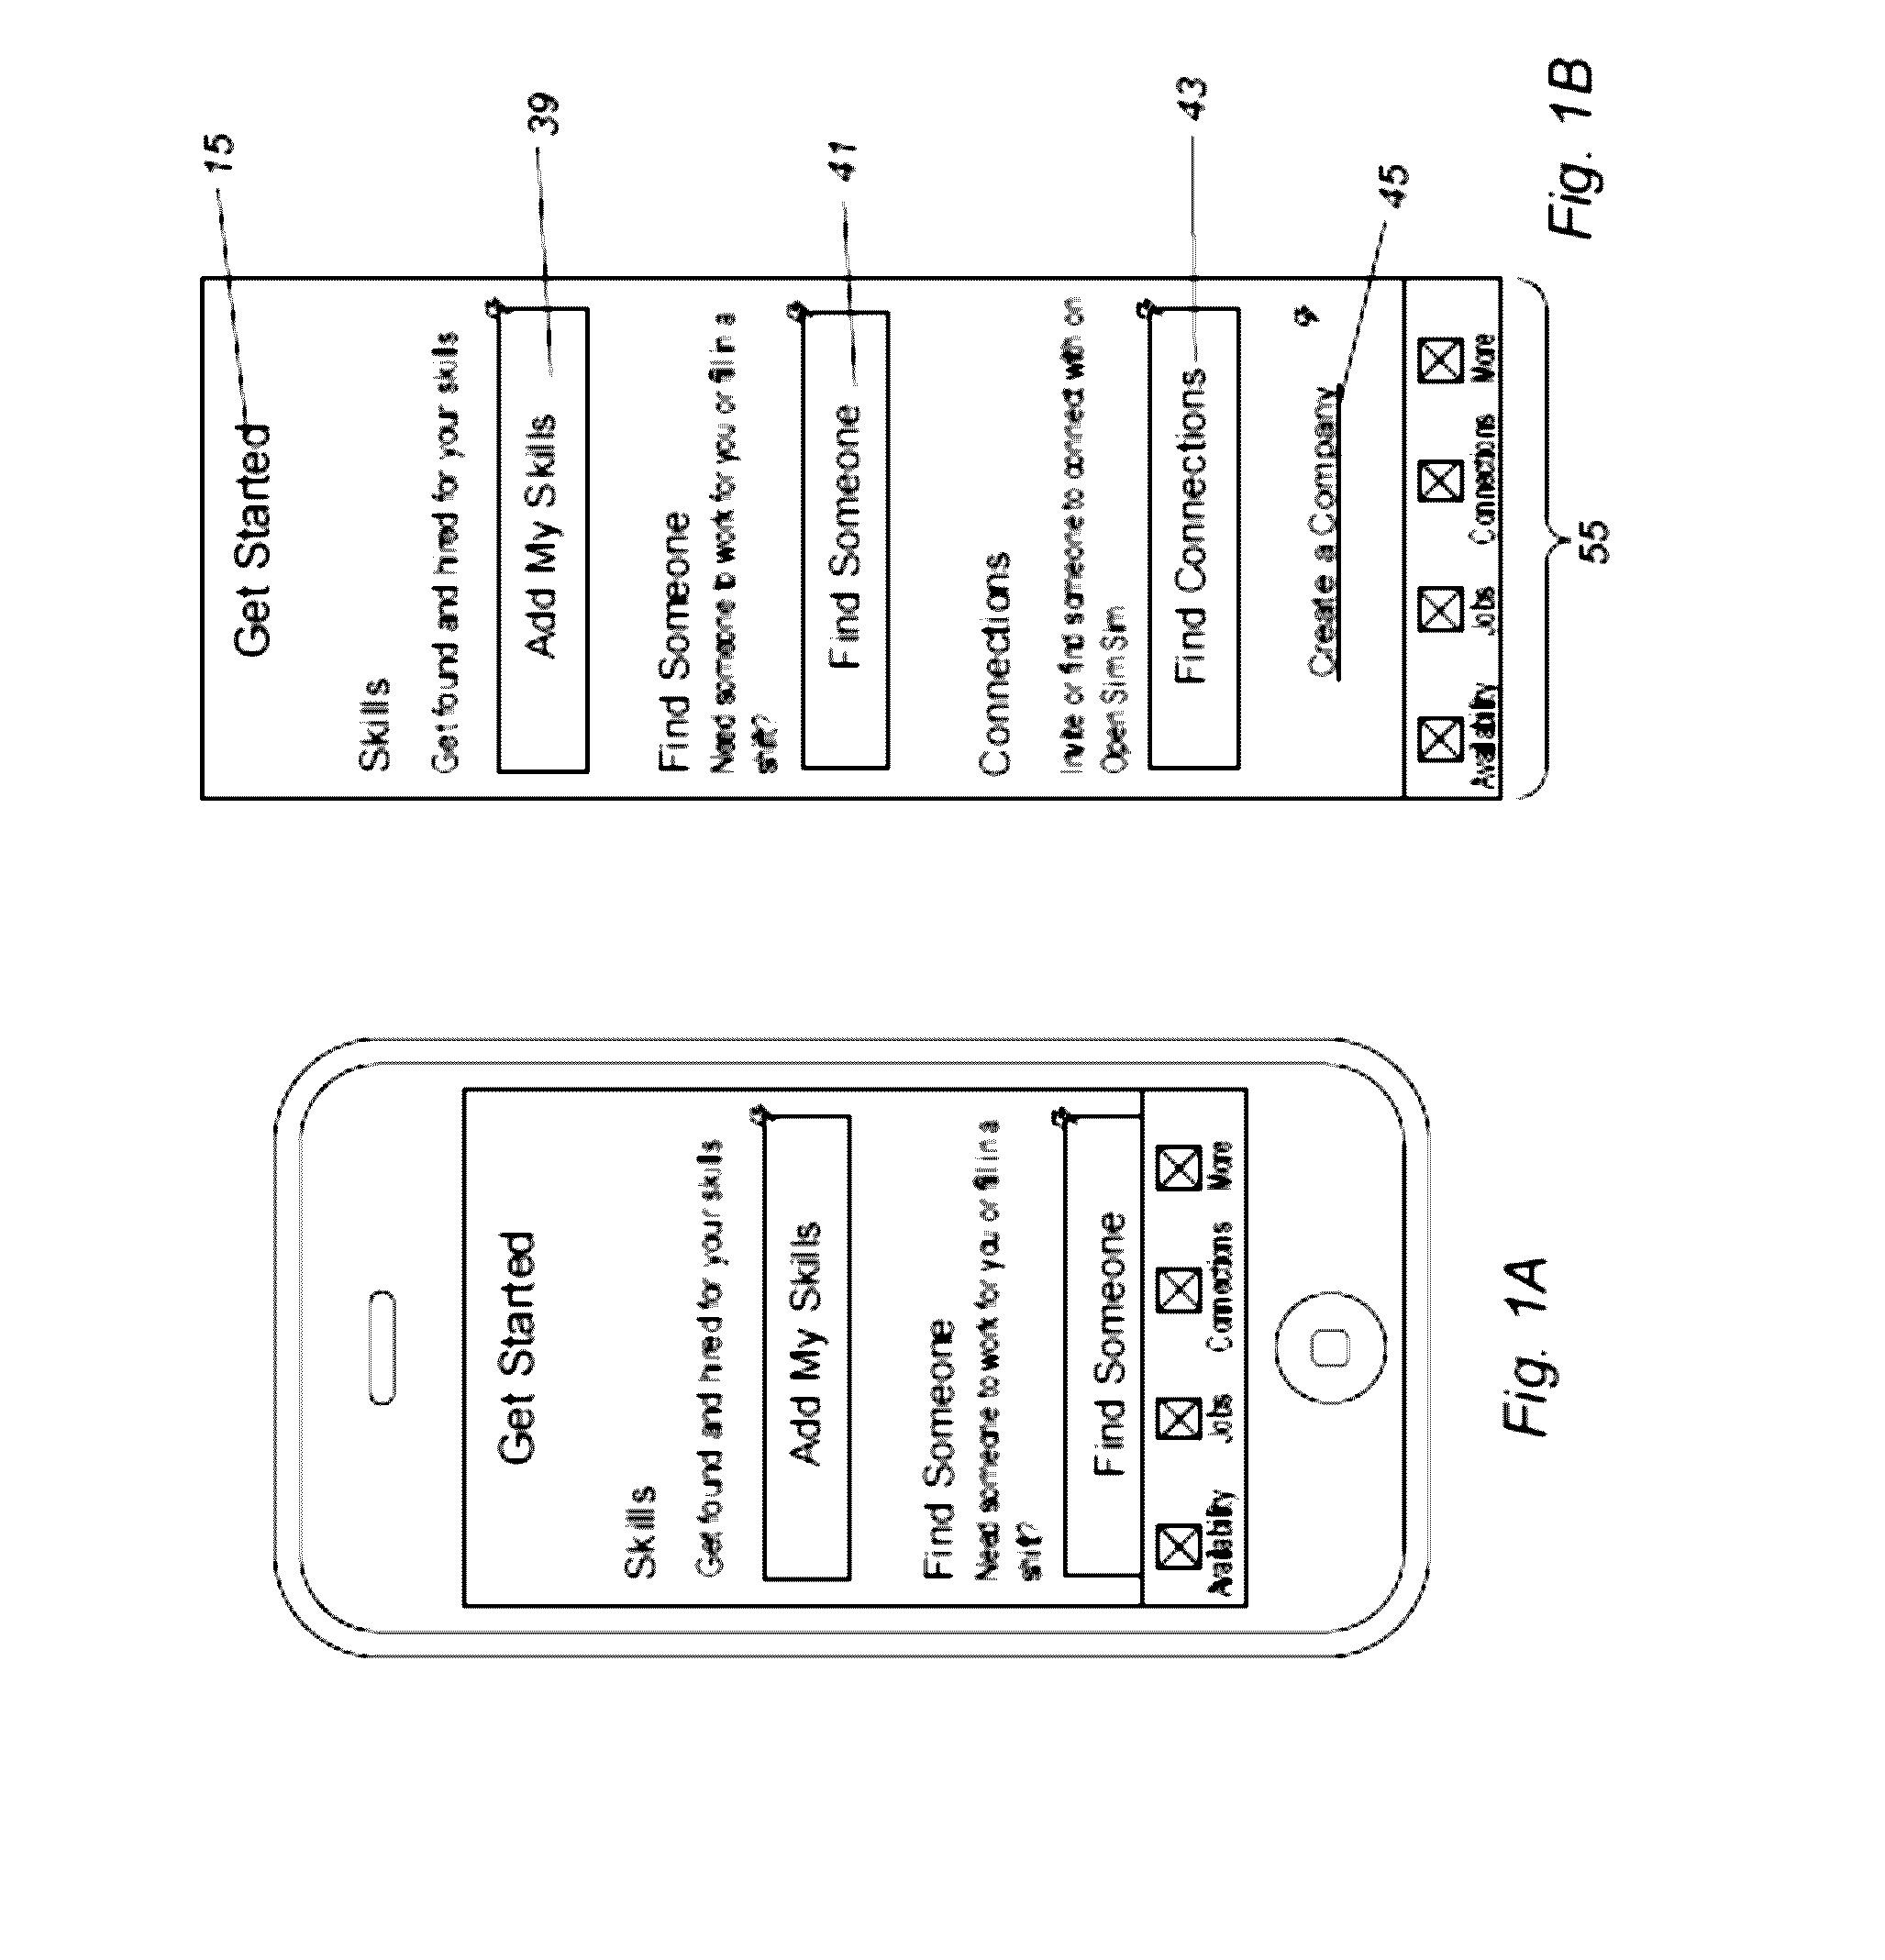 Web and mobile based scheduler and methods for identifying employment networking opportunities utilizing reserved scheduling